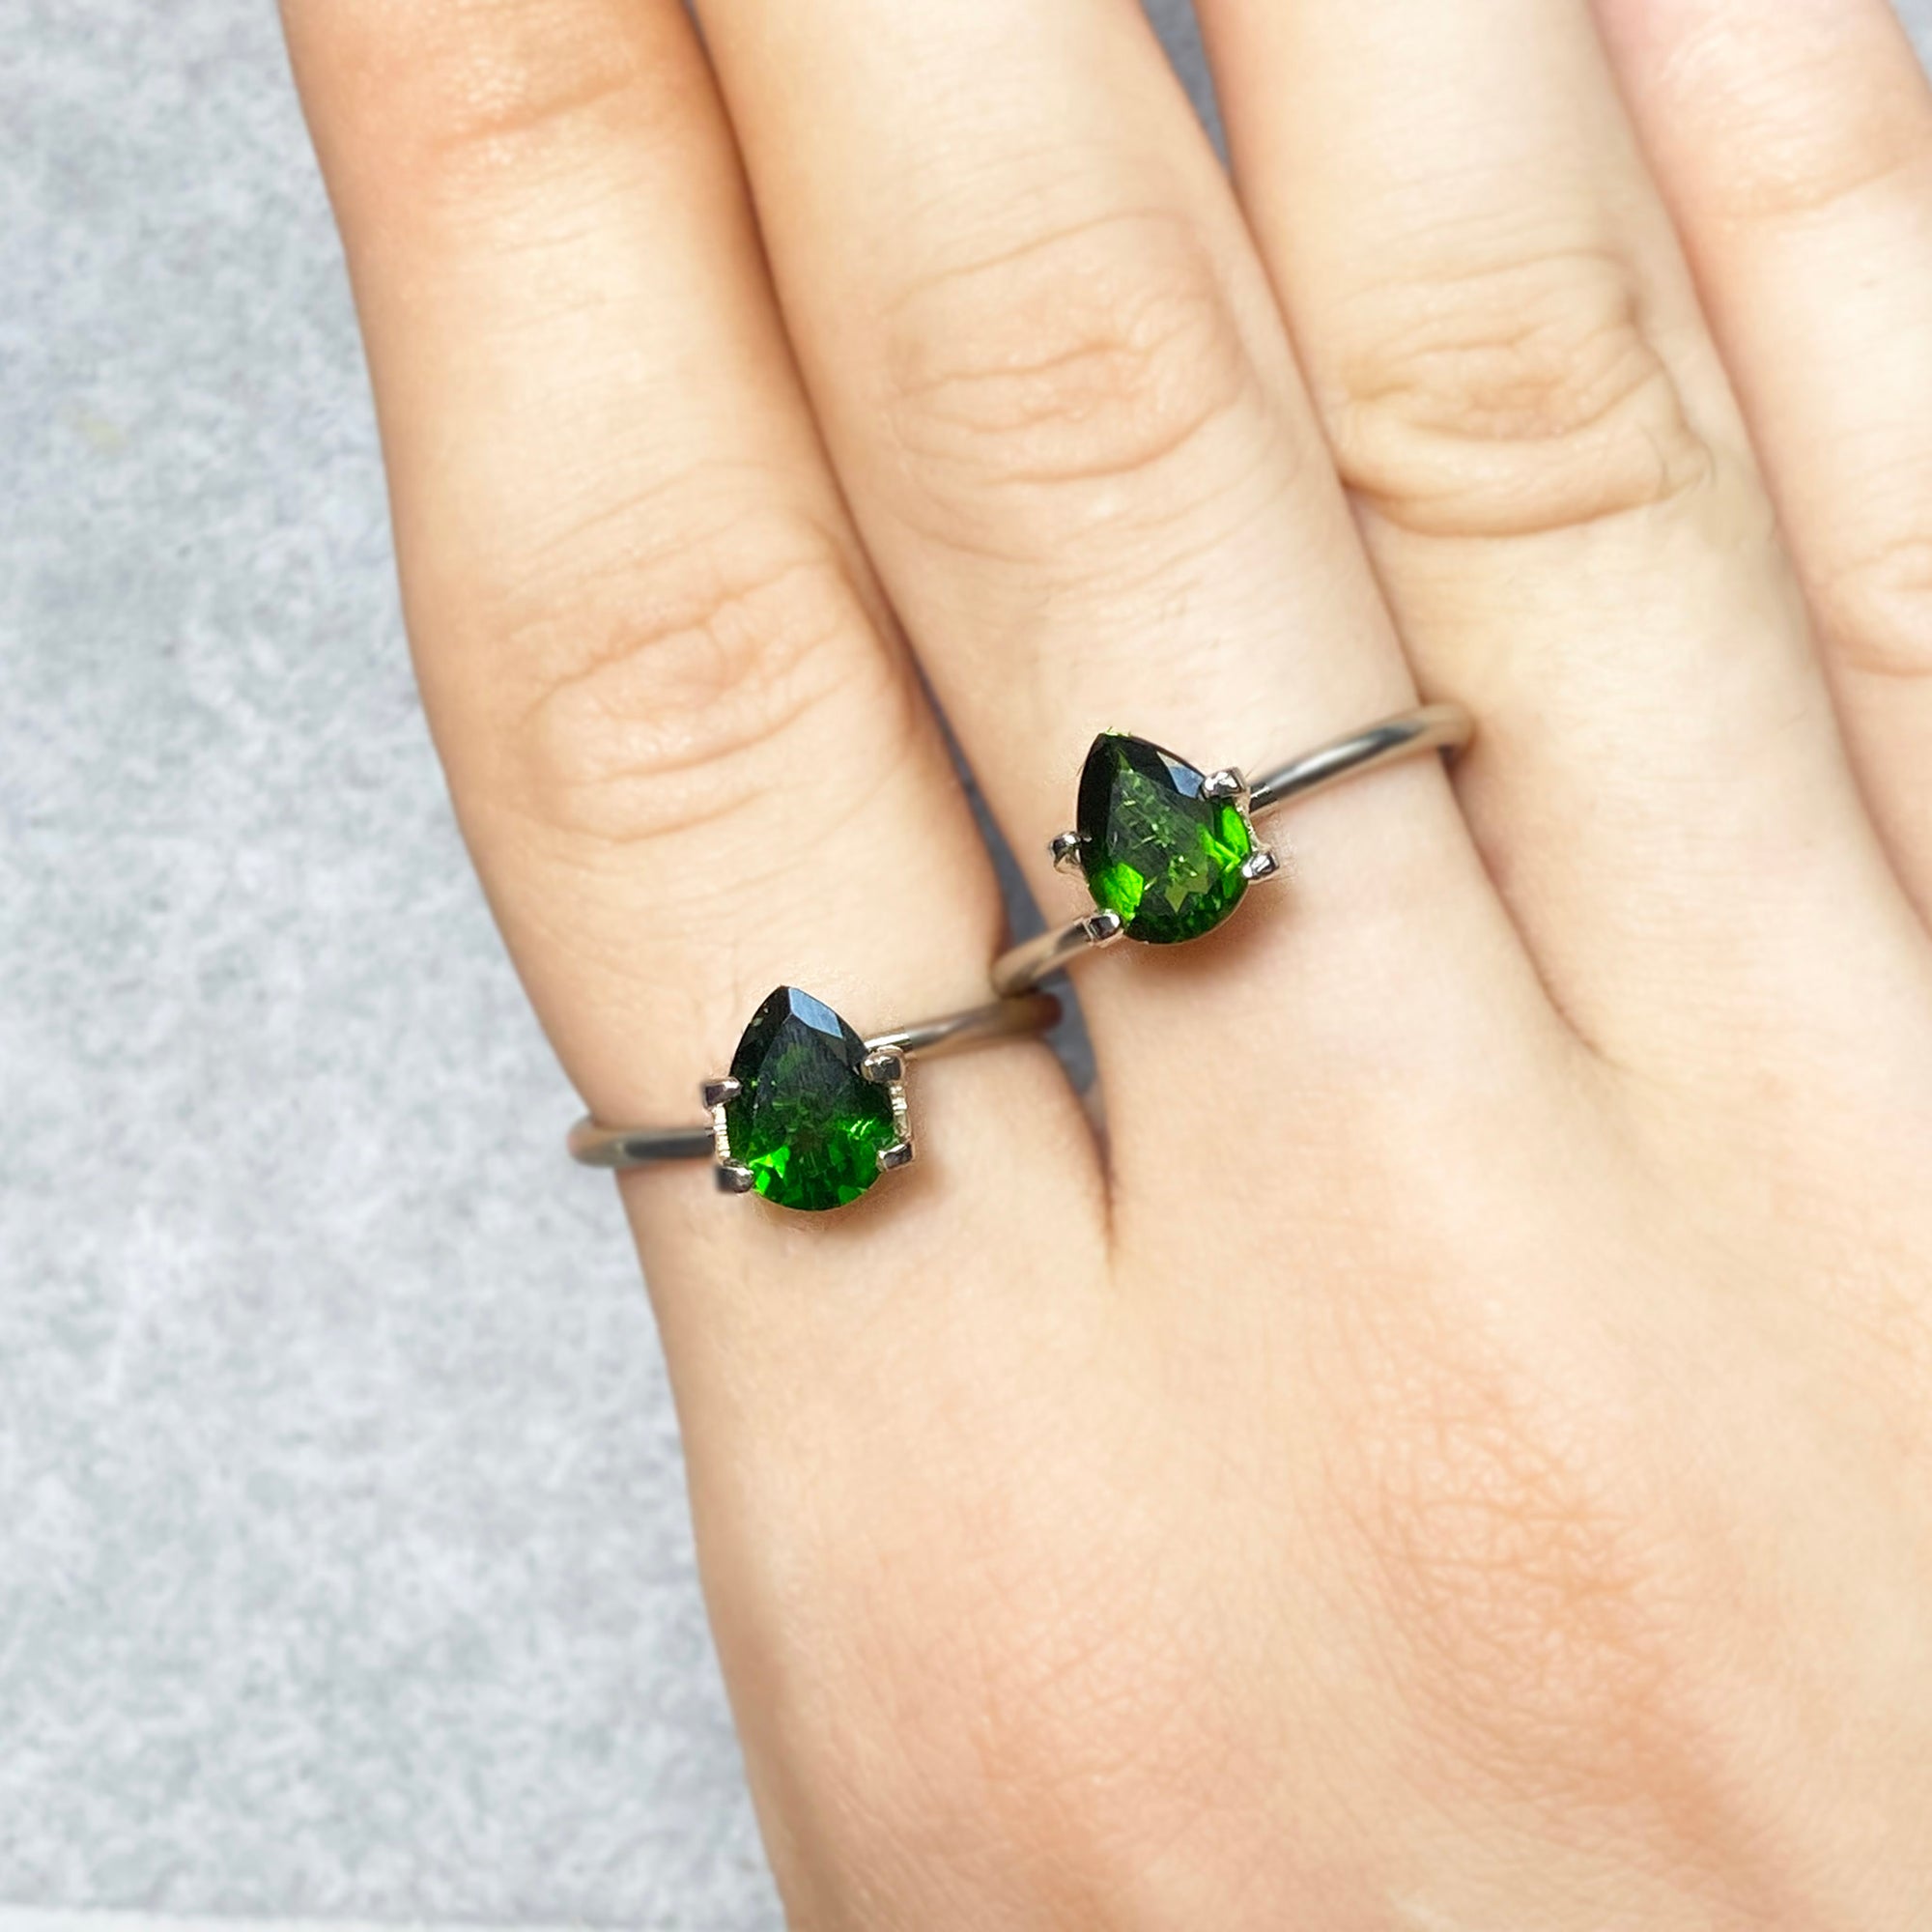 Diopside Forest Green Pear Pair 1.3CT G369